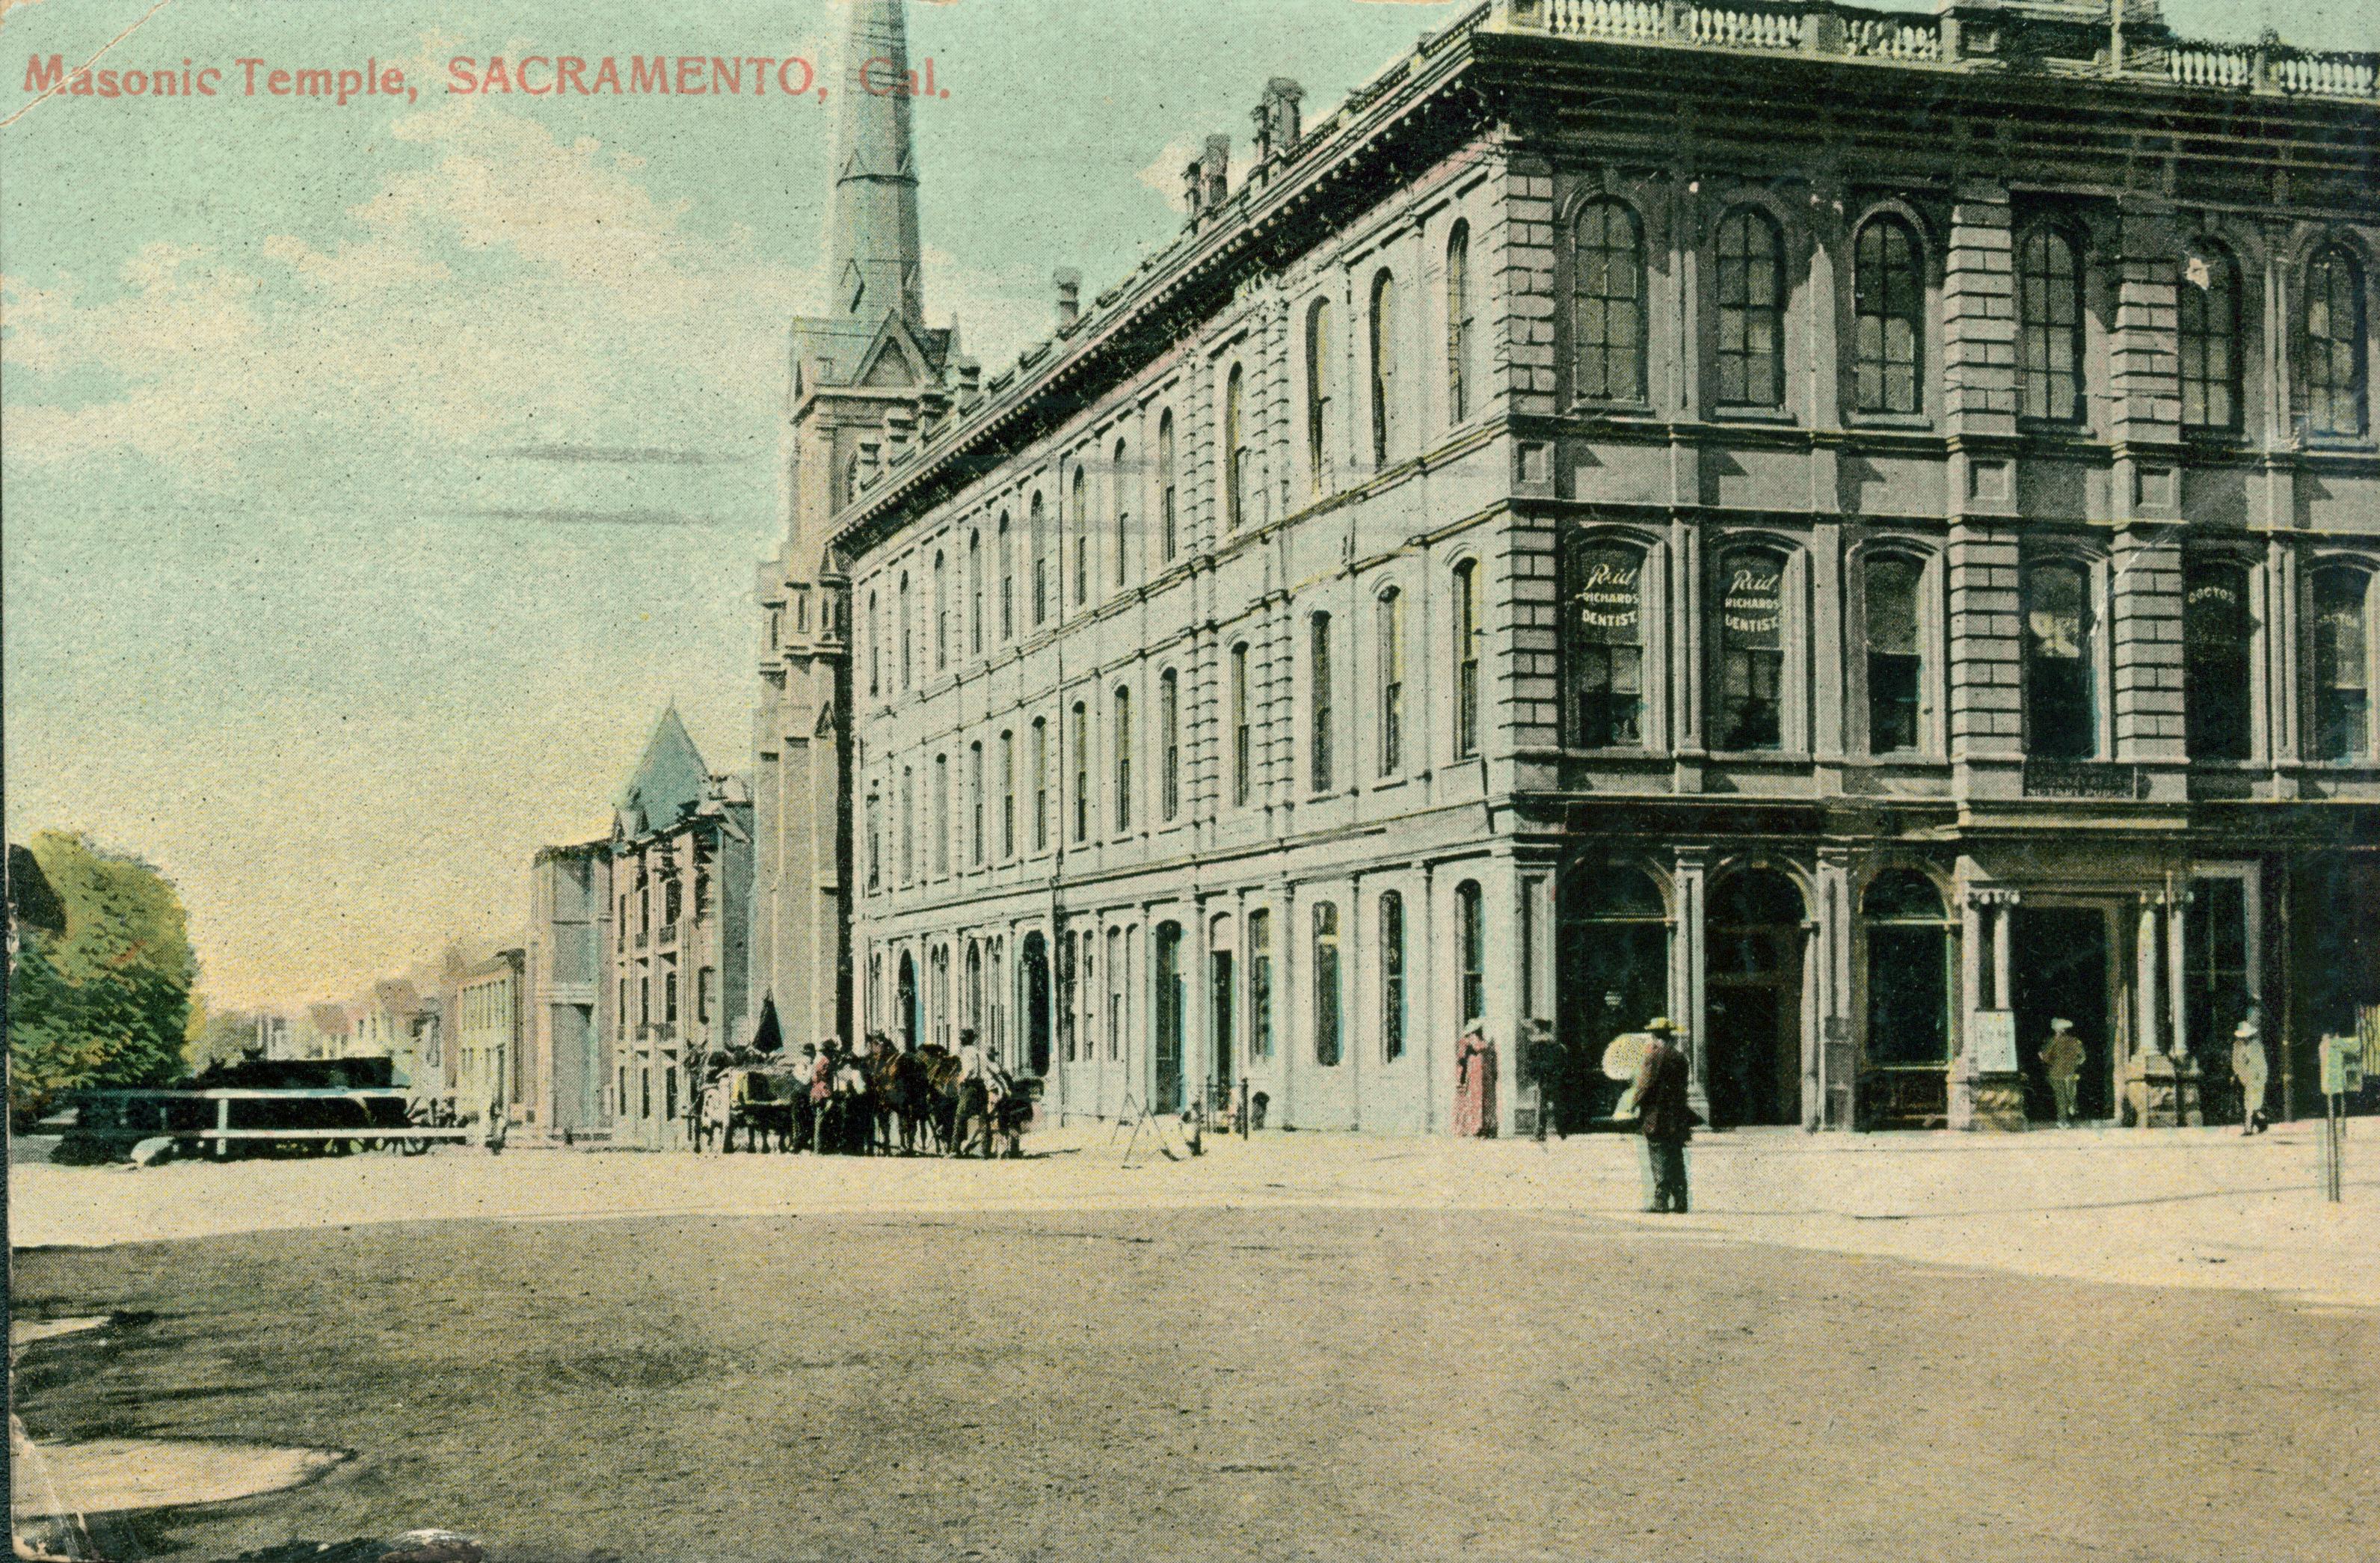 This postcard shows a corner view of the Masonic Temple in Sacramento.